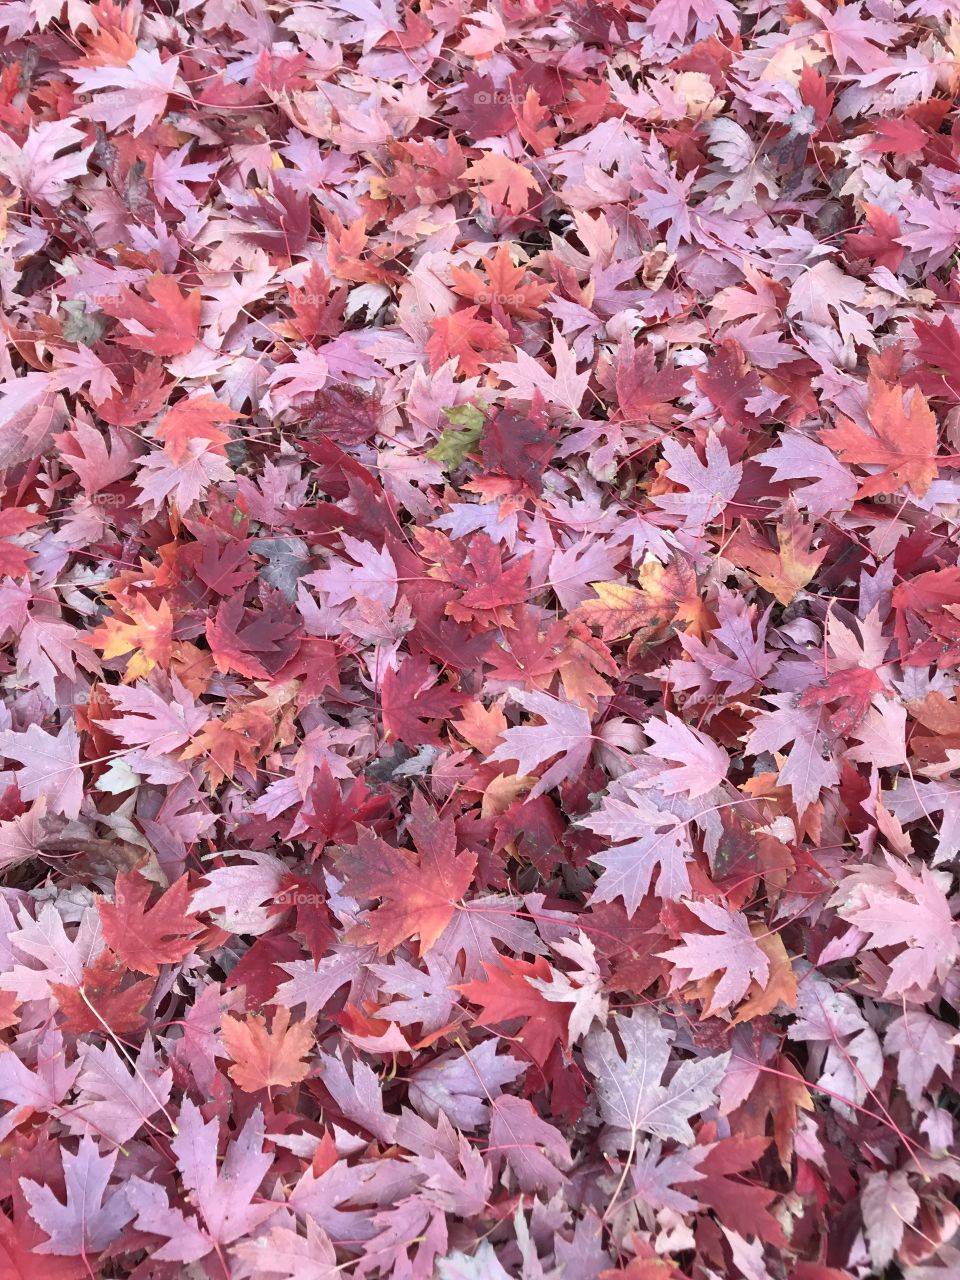 Fallen autumn leaves with a red color scheme